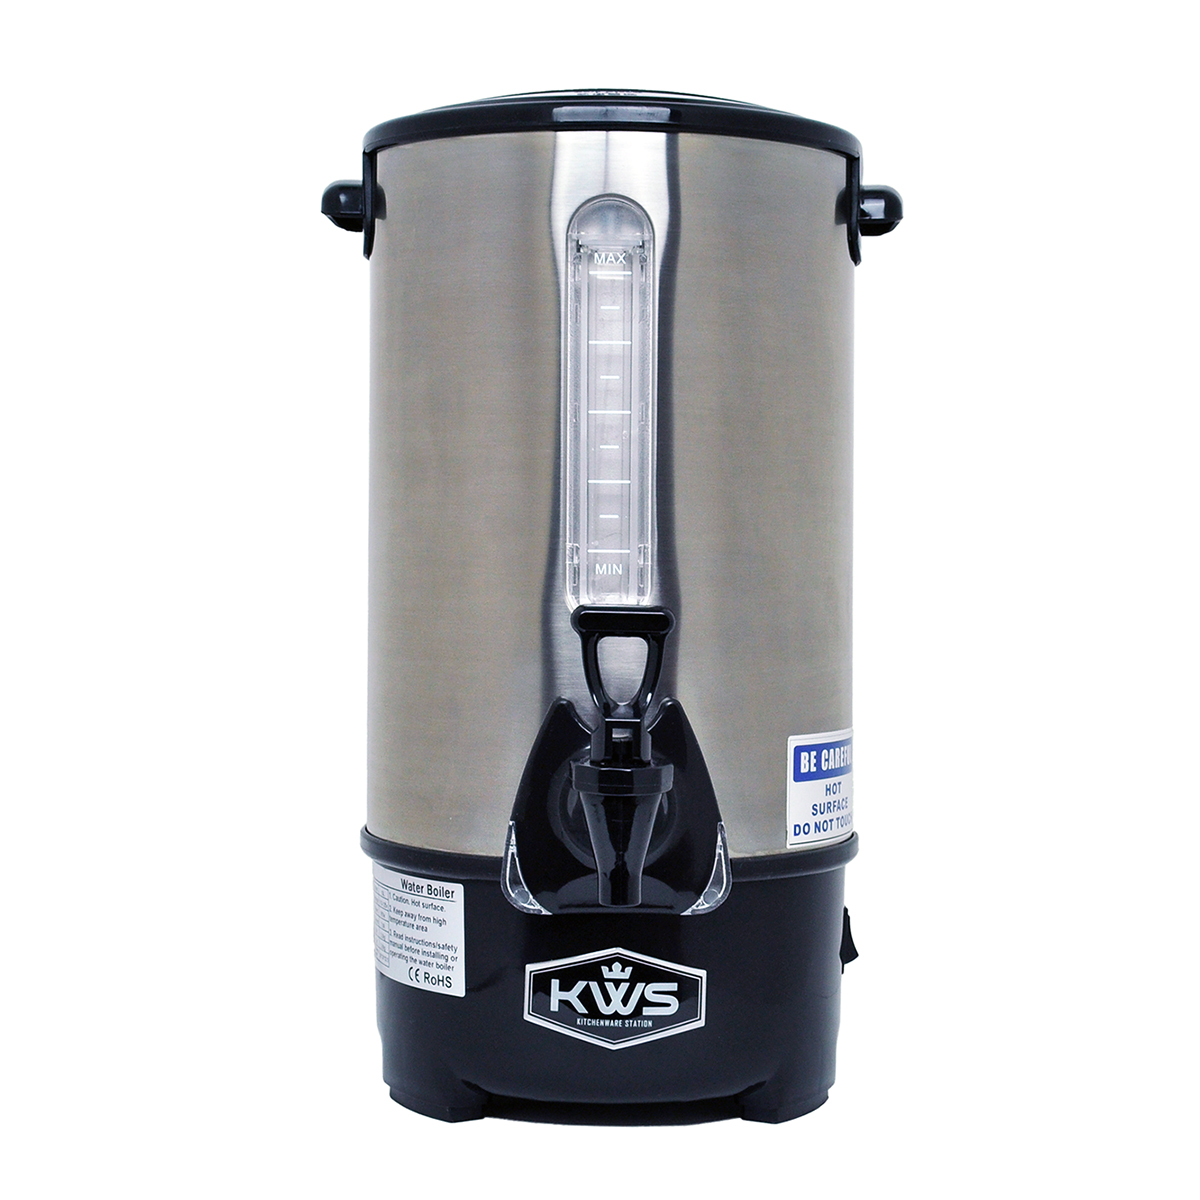 KWS Heat Insulated Water Boiler and Warmer